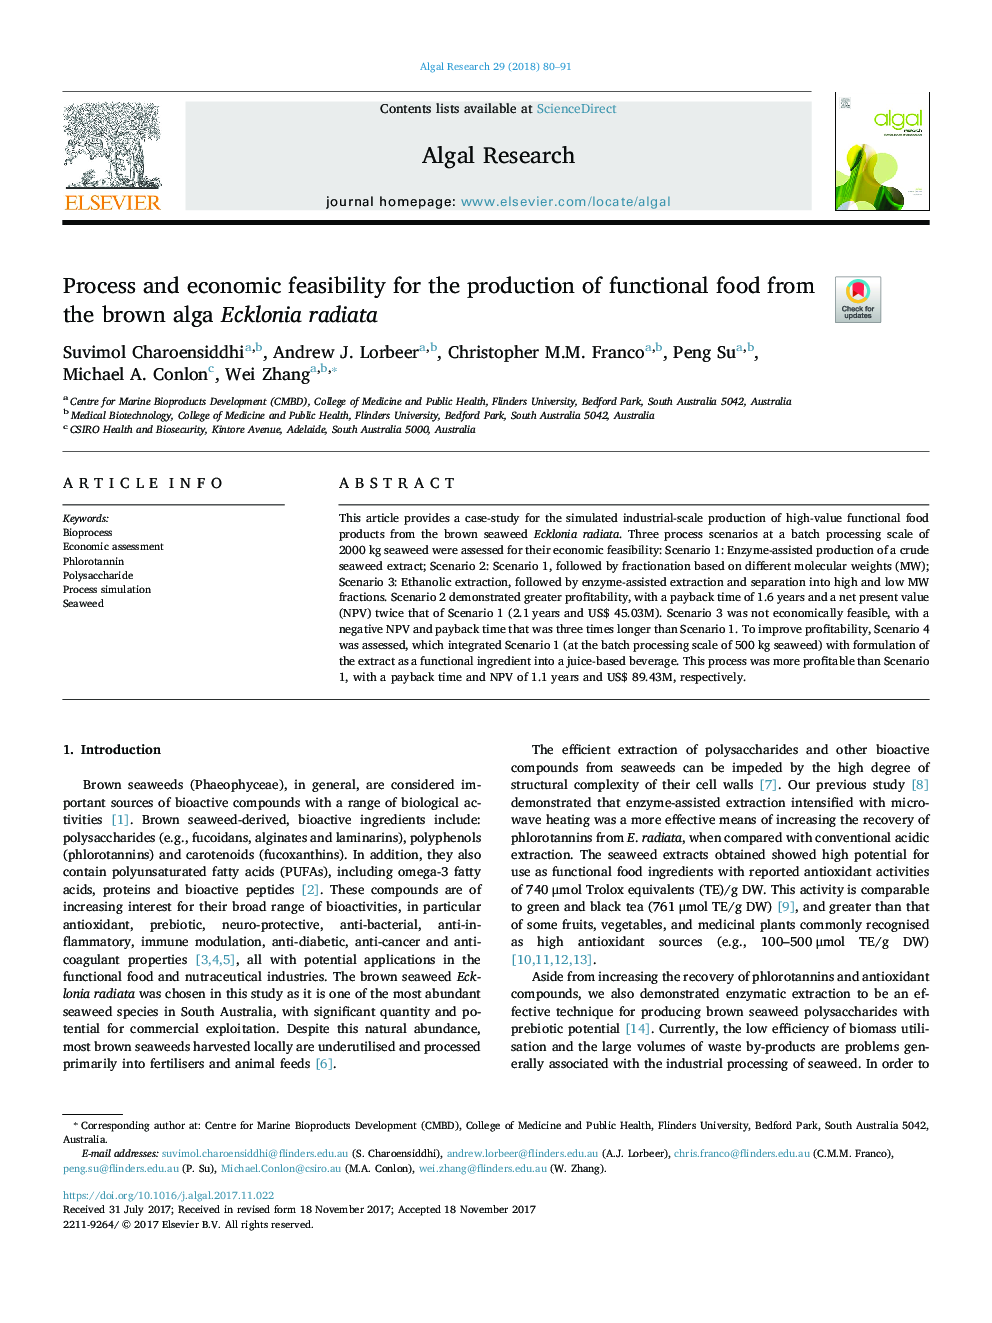 Process and economic feasibility for the production of functional food from the brown alga Ecklonia radiata